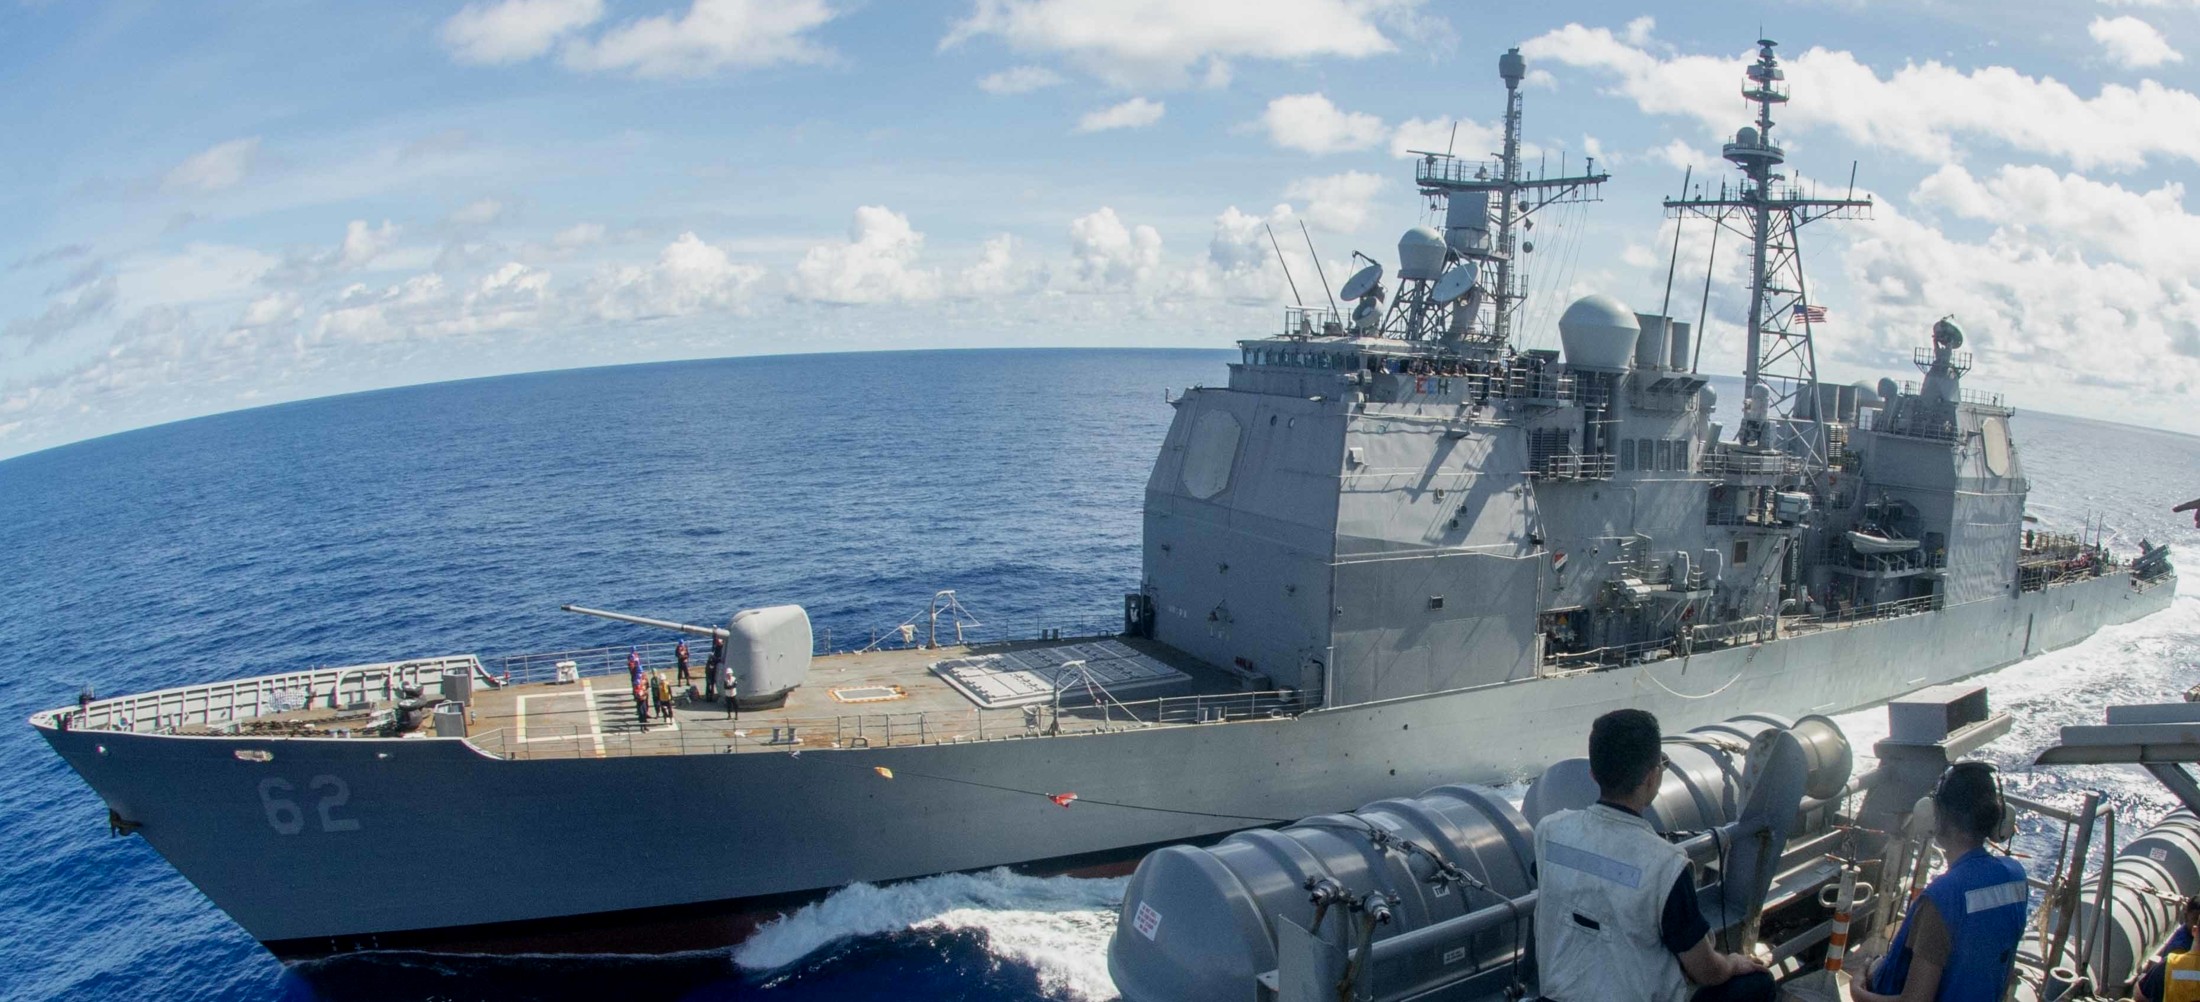 cg-62 uss chancellorsville ticonderoga class guided missile cruiser aegis us navy south china sea 102